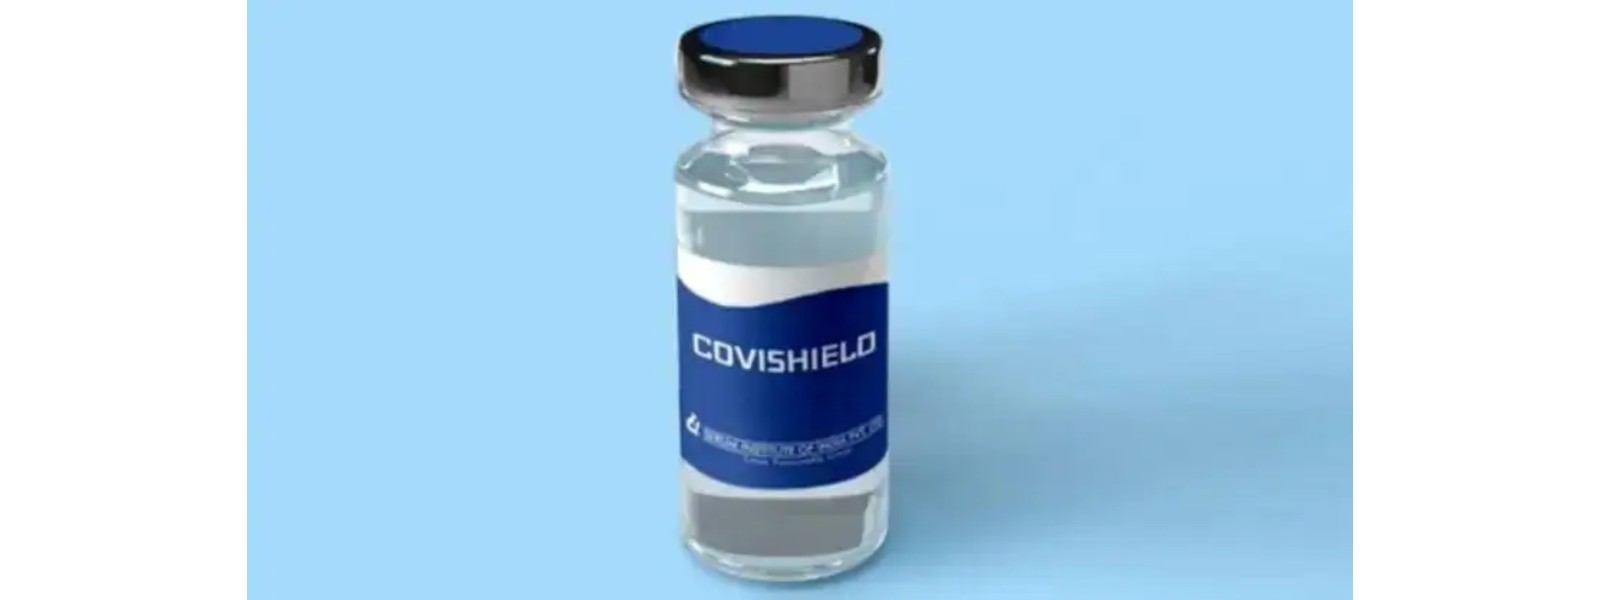 Over 95,000 jabbed with COVISHIELD in 04 days.